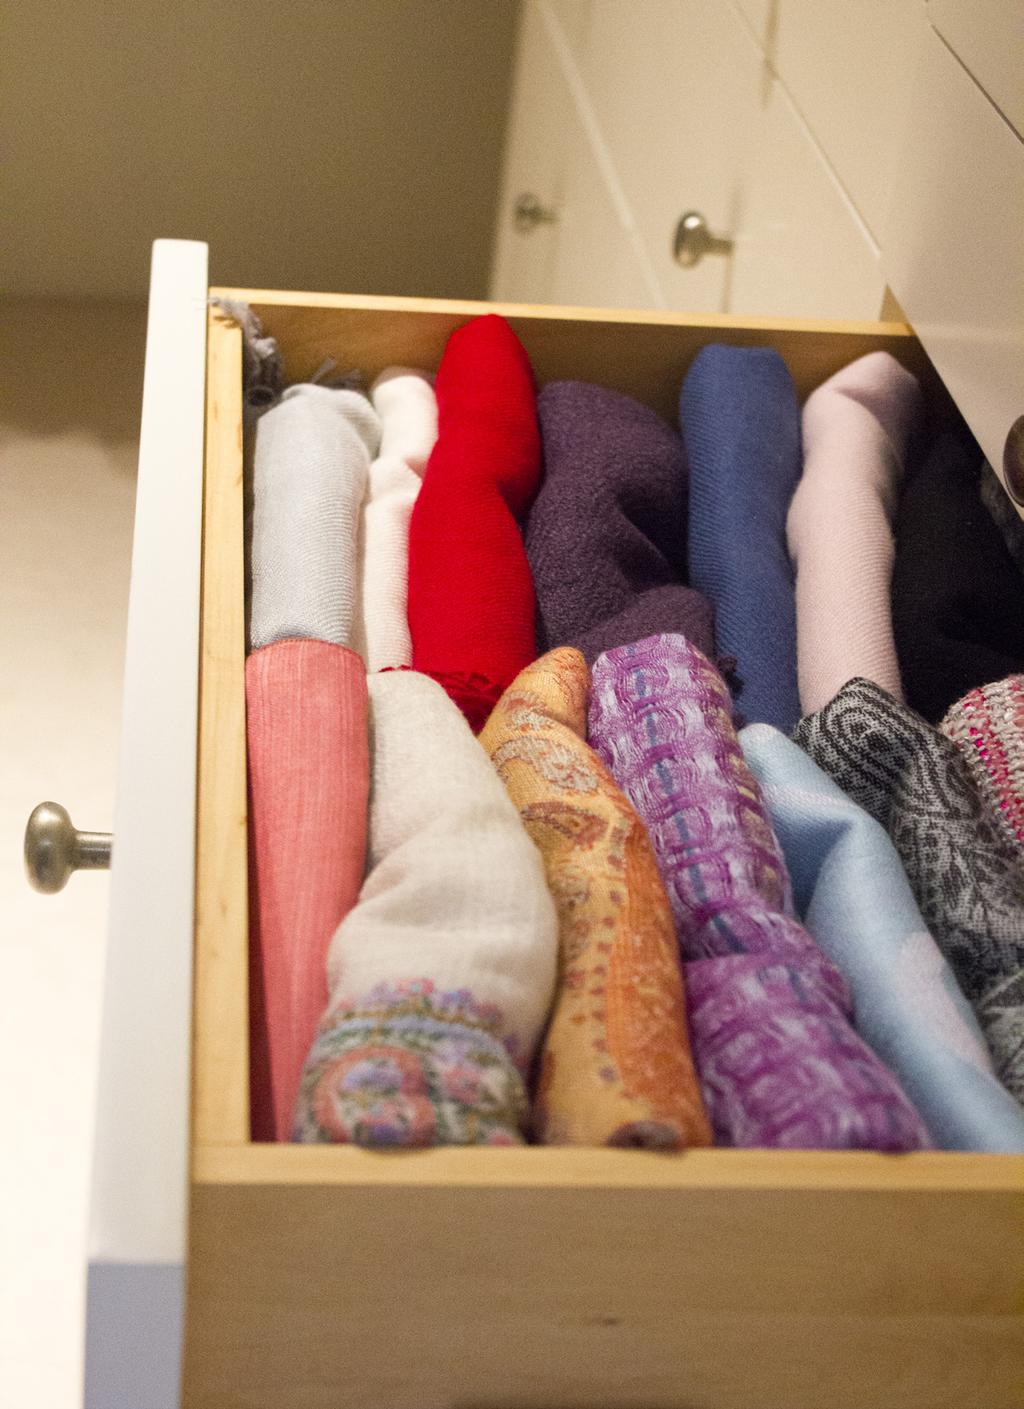 When your life is busy and hectic, it can be hard to imagine taking time to organize your closet.